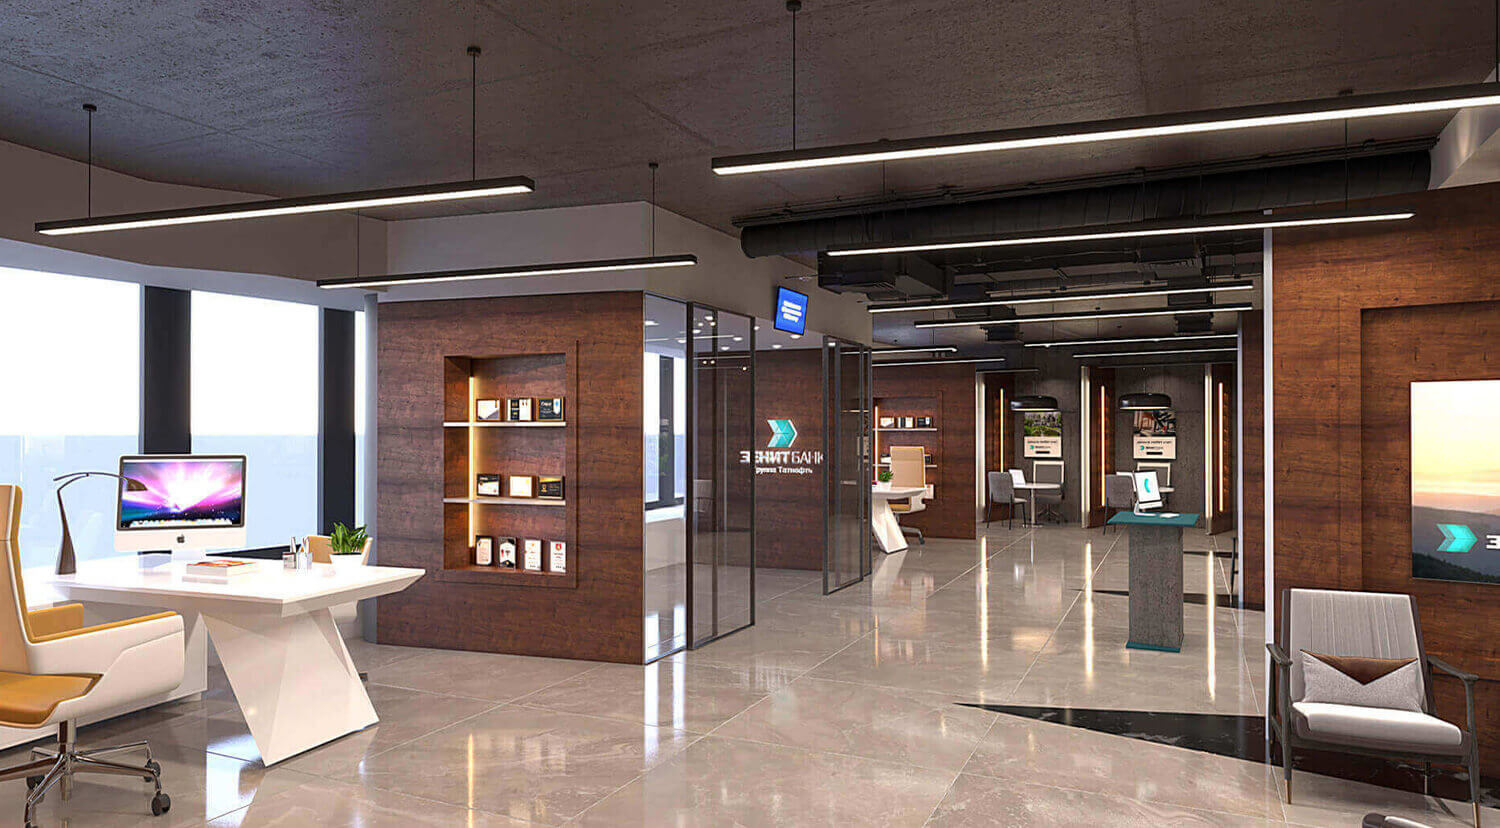 Zenit Bank Russia, Manager’s consultation desk, entrance lobby to banking hall - Campbell Rigg Agency